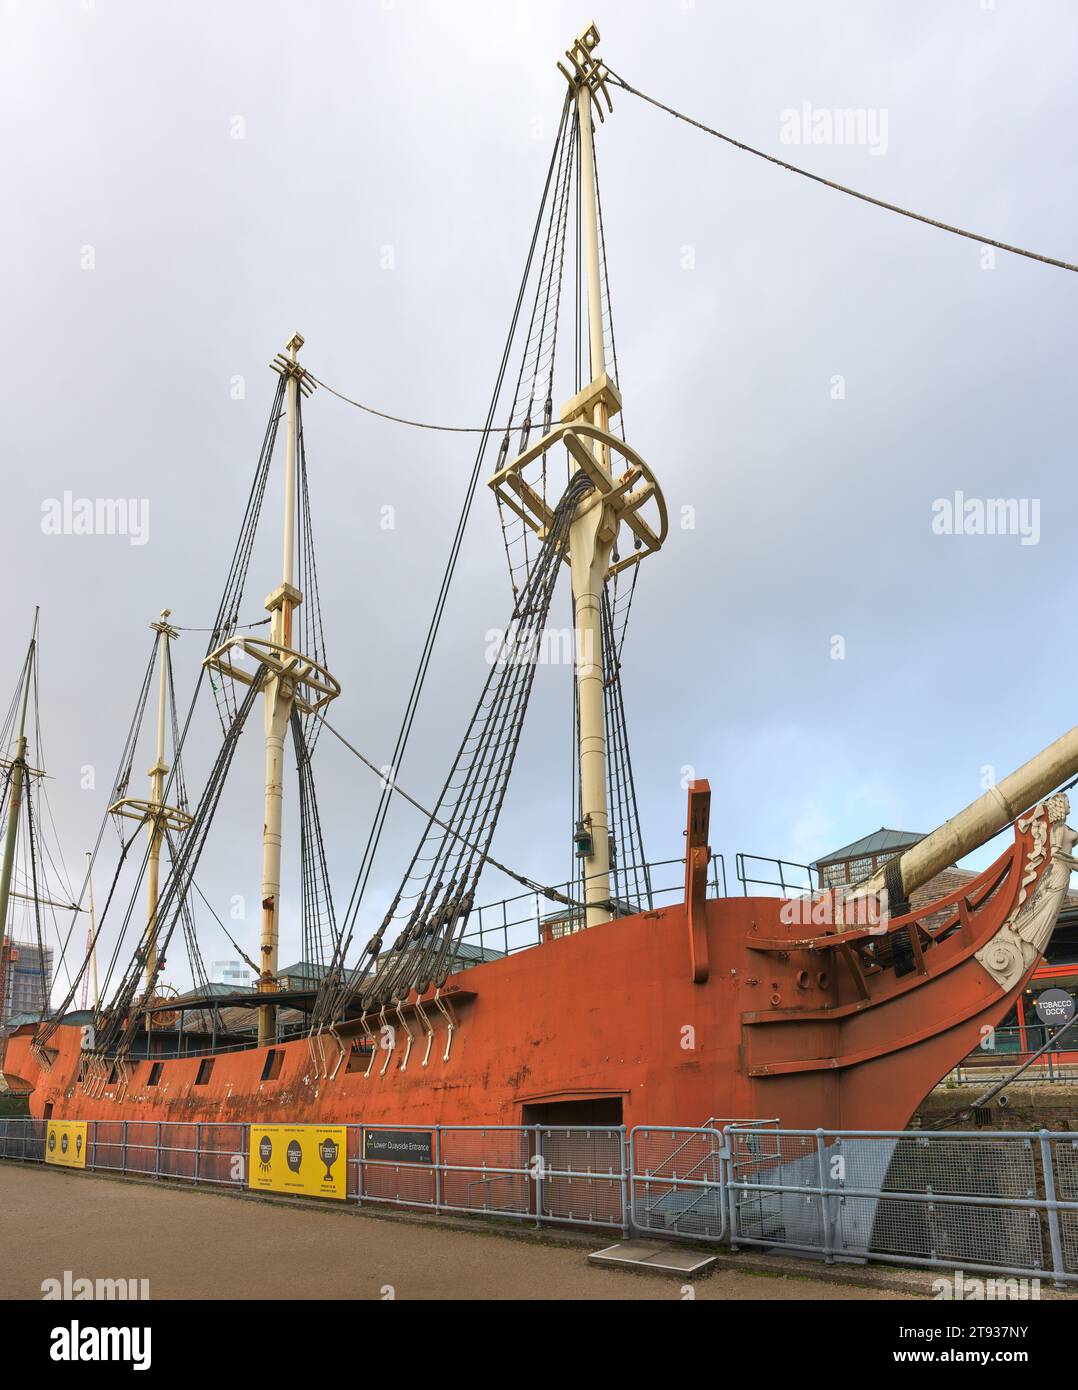 Three Sisters ( copy of an 18th century american merchant schooner captured by the British during the Anglo-American War), at Tobacco Dock, Wapping, L Stock Photo